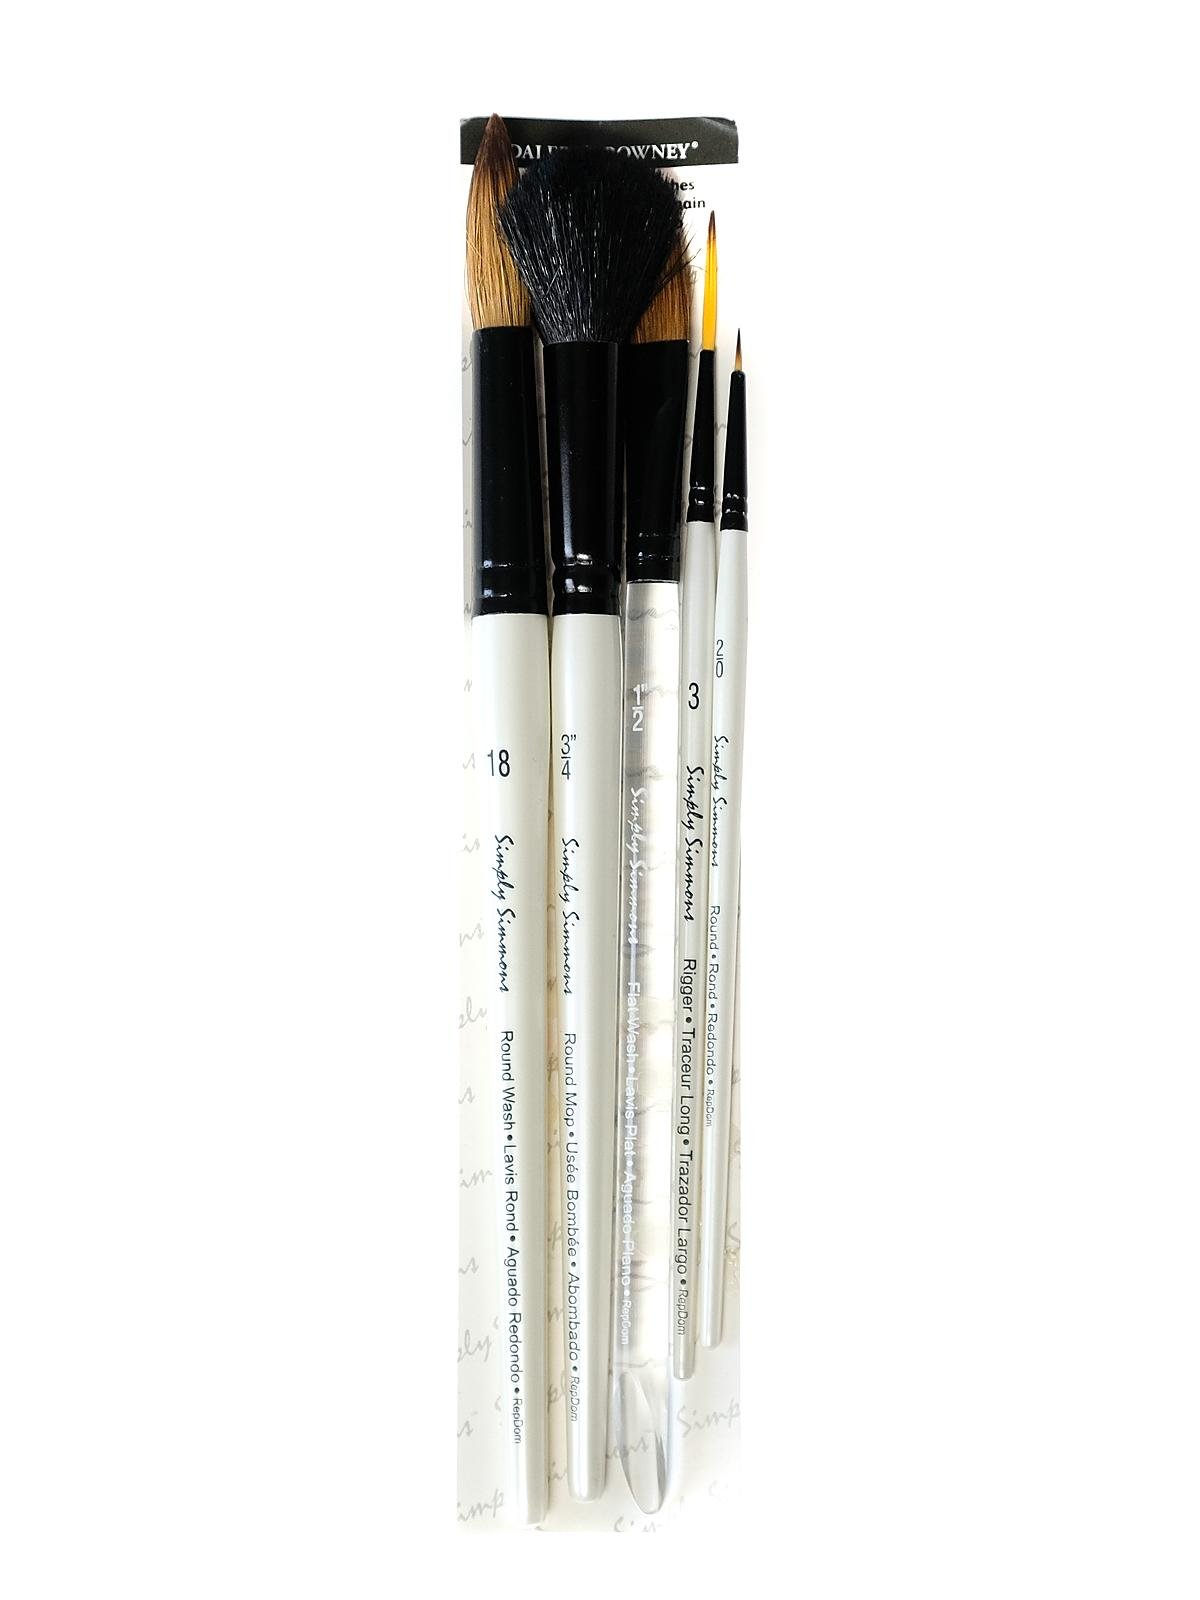 Robert Simmons SIMPLY SIMMONS Value Brush 4 Set Watercolor Synthetic